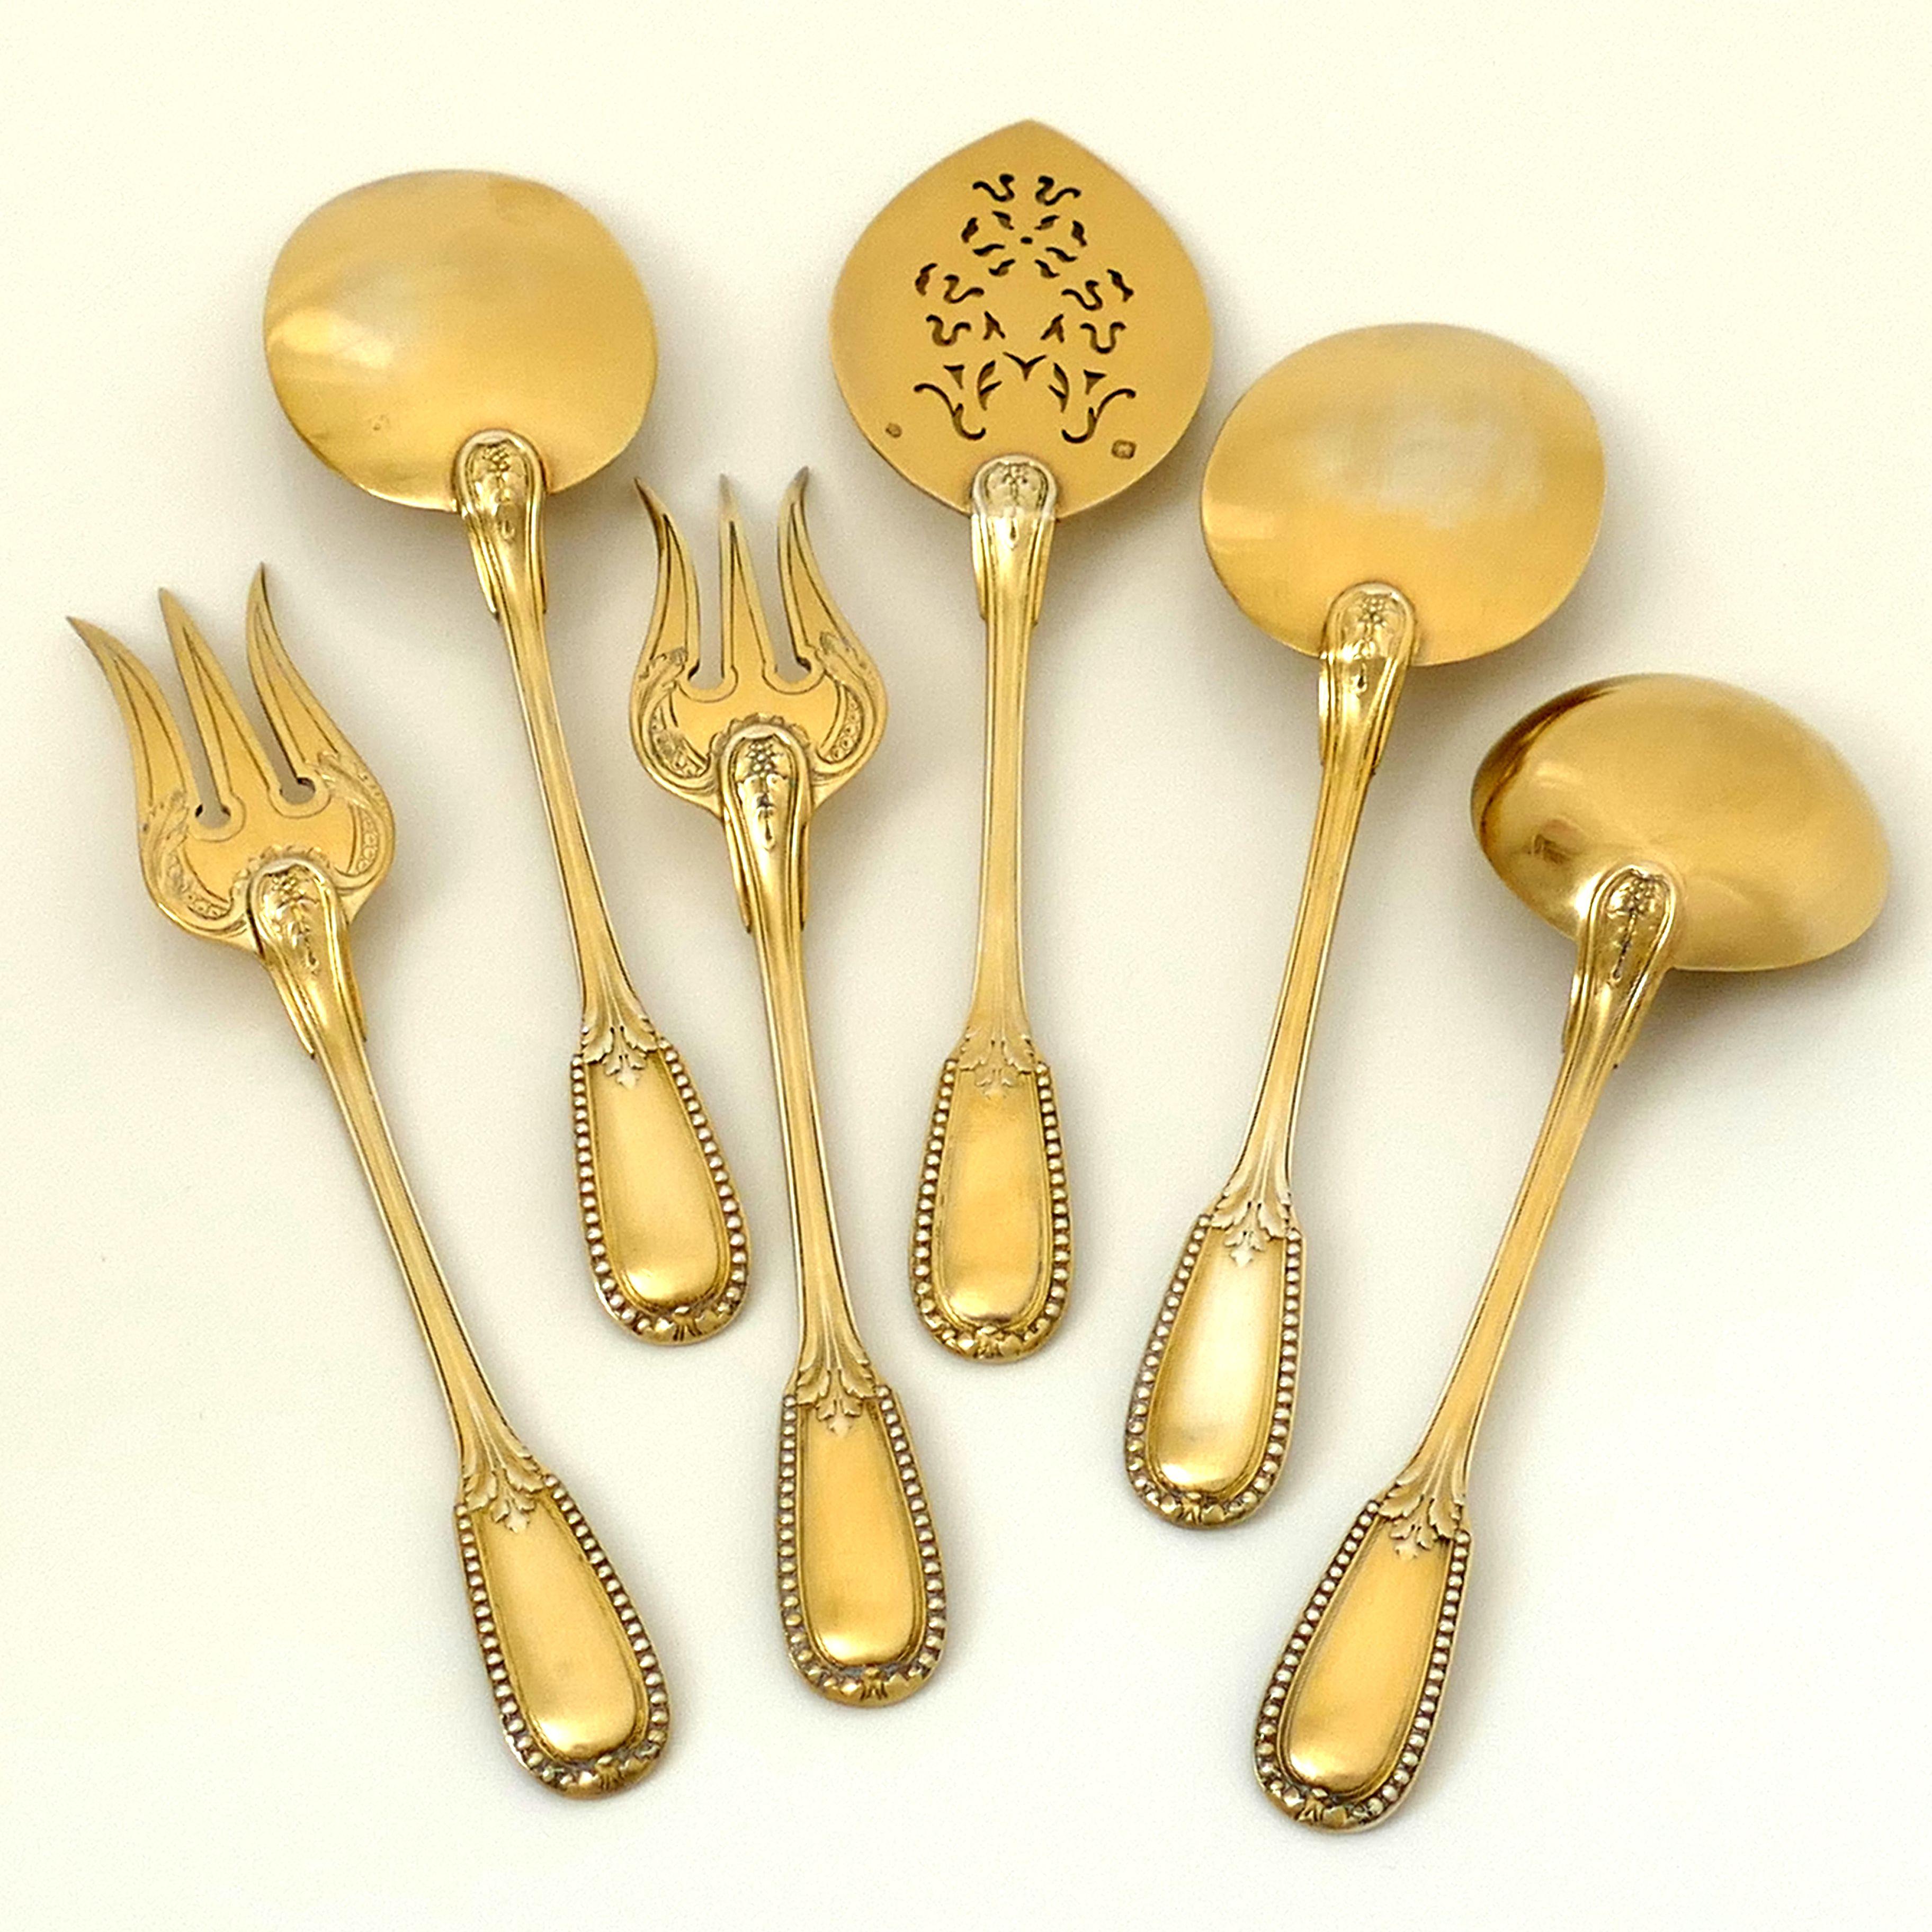 Puiforcat French Sterling Silver 18k Gold Dessert Hors D'oeuvre Set 6 Pc, Box For Sale 1